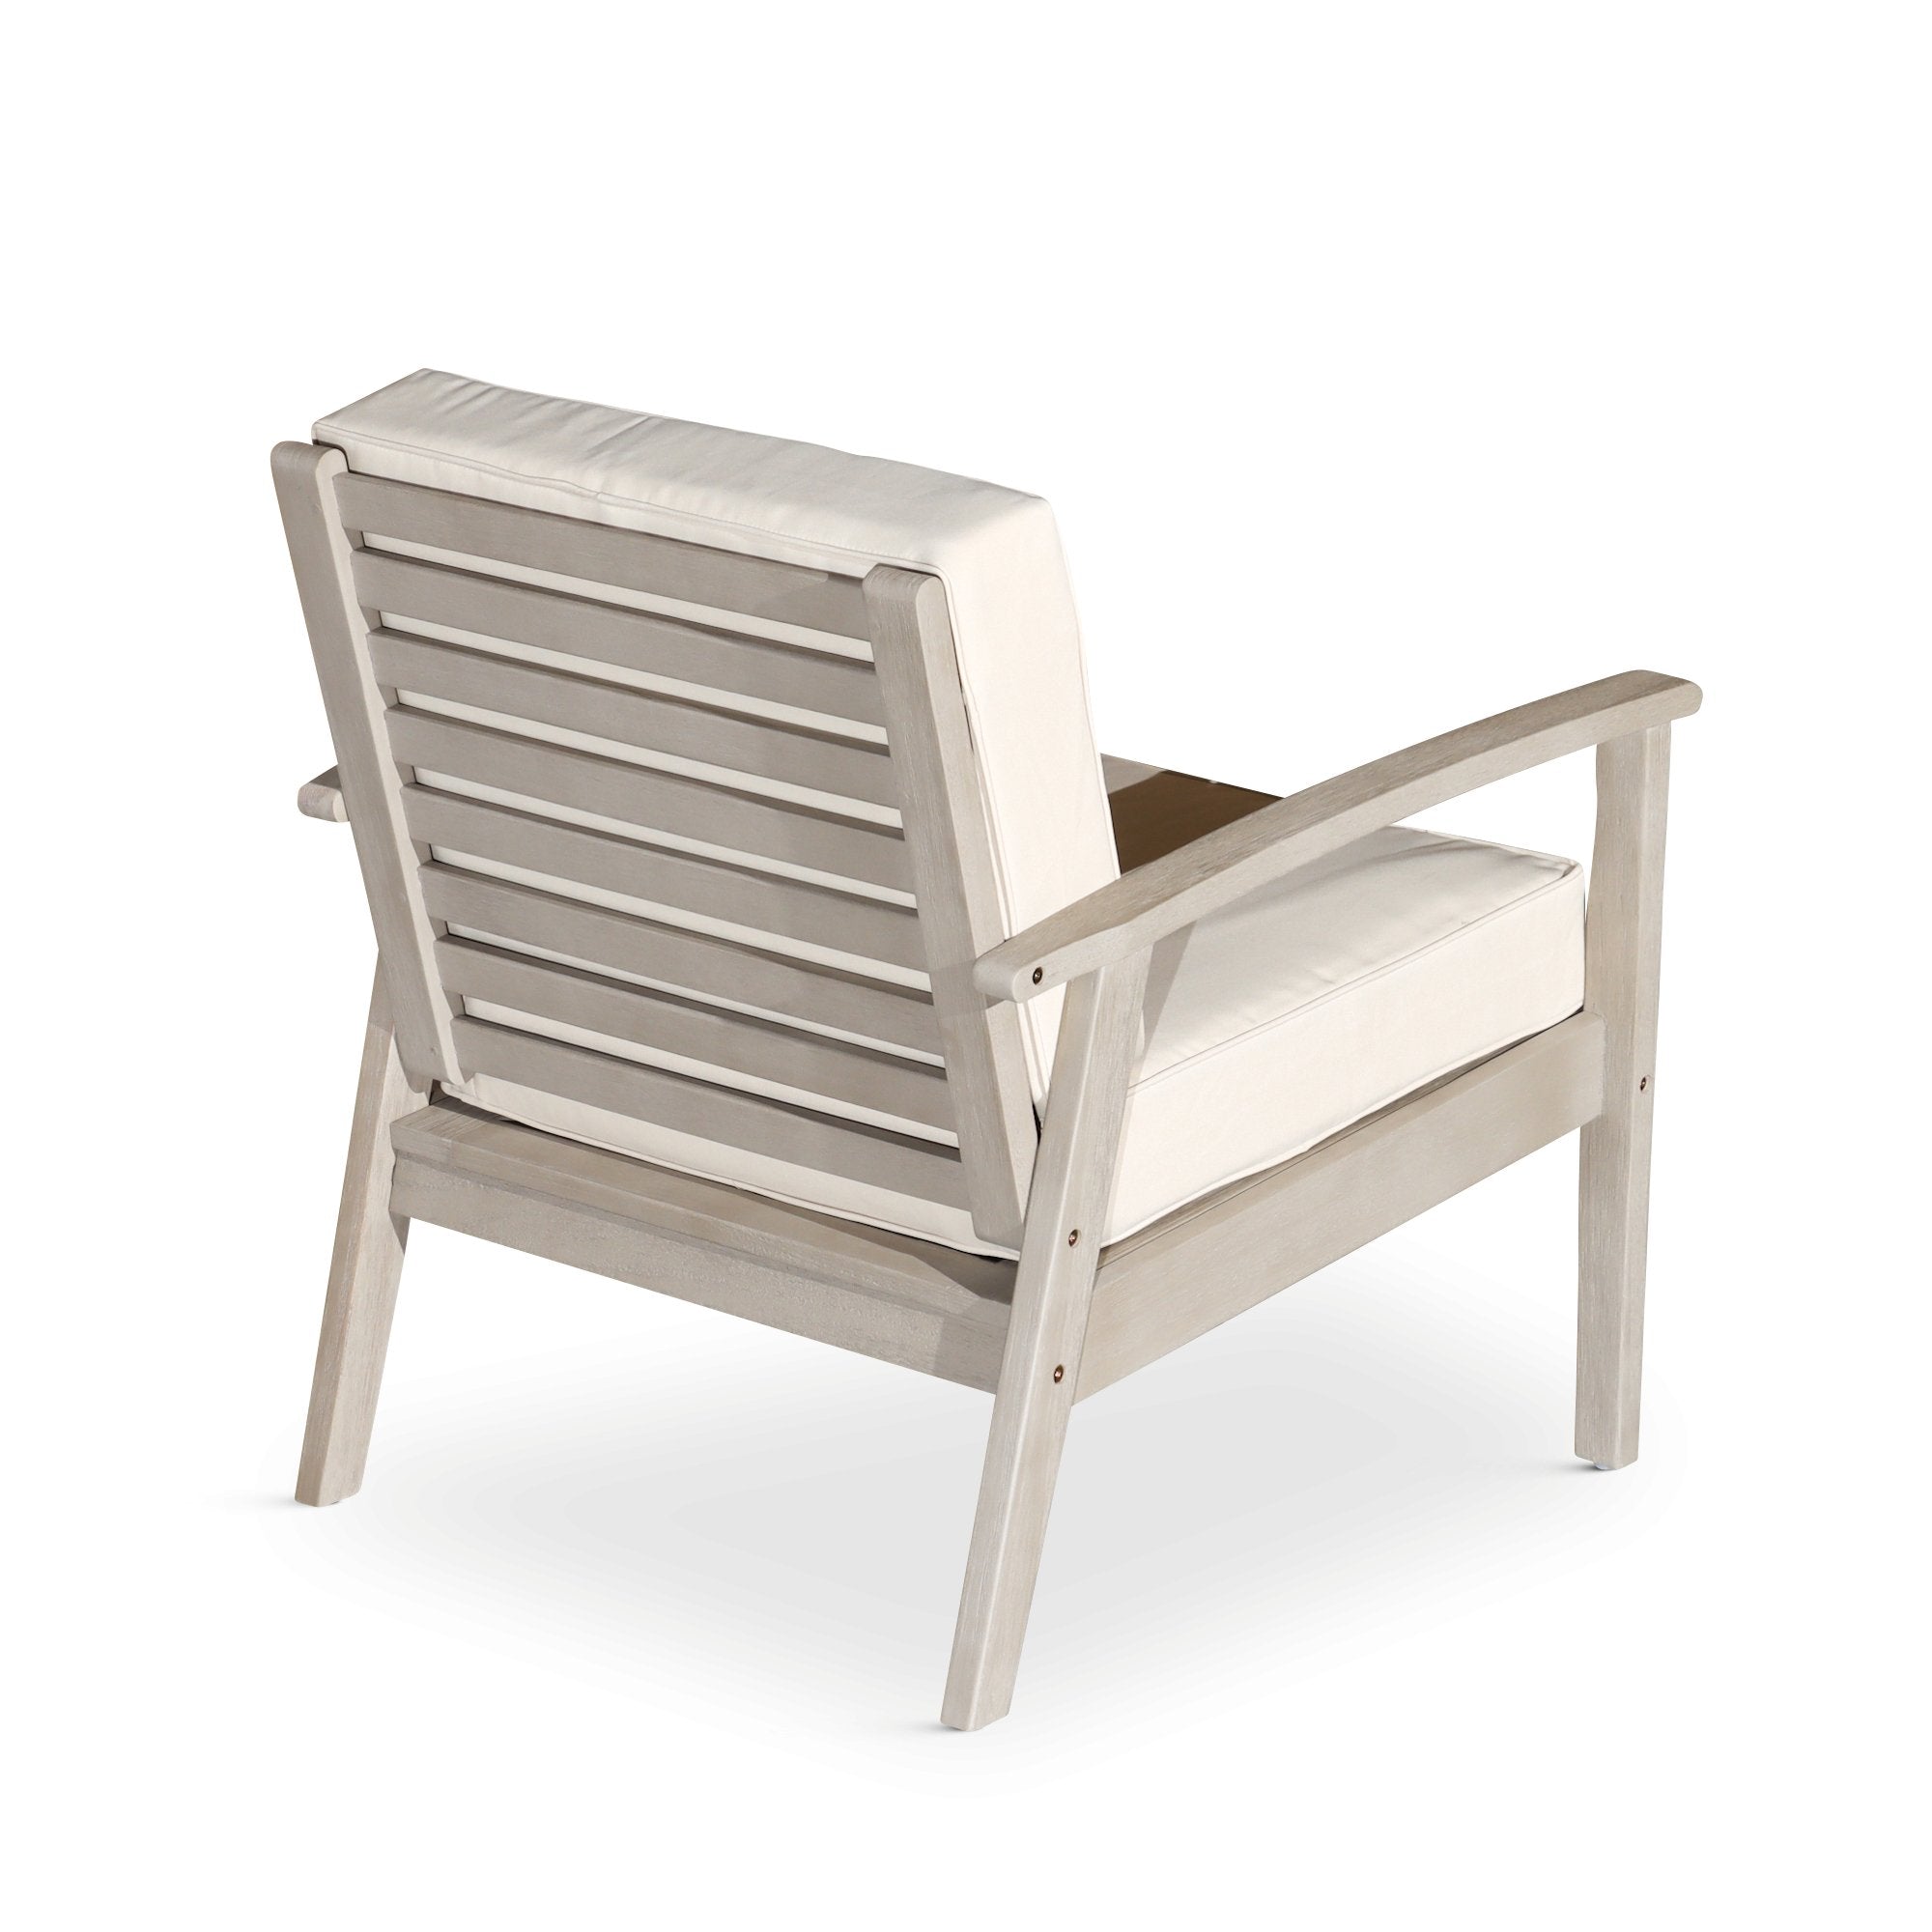 Deep Seat Outdoor Chair, Silver Gray Finish, Sand Cushions - Tuesday Morning-Chairs & Seating